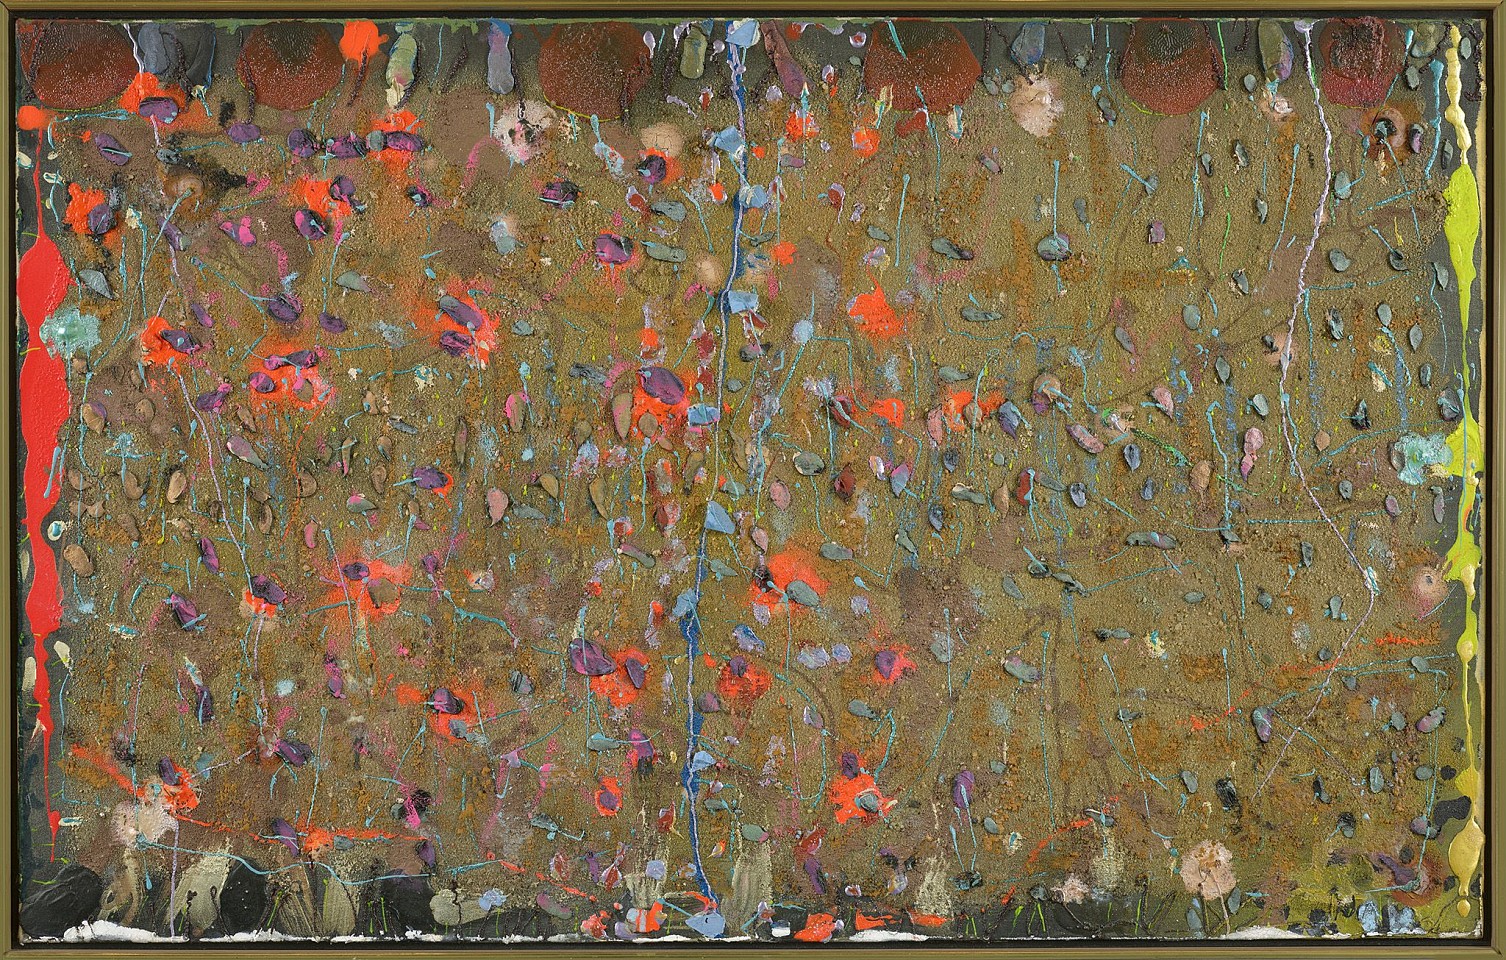 Stanley Boxer, Broideriesfromadark, 1990
Oil and mixed media on canvas, 30 x 48 in. (76.2 x 121.9 cm)
BOX-00124